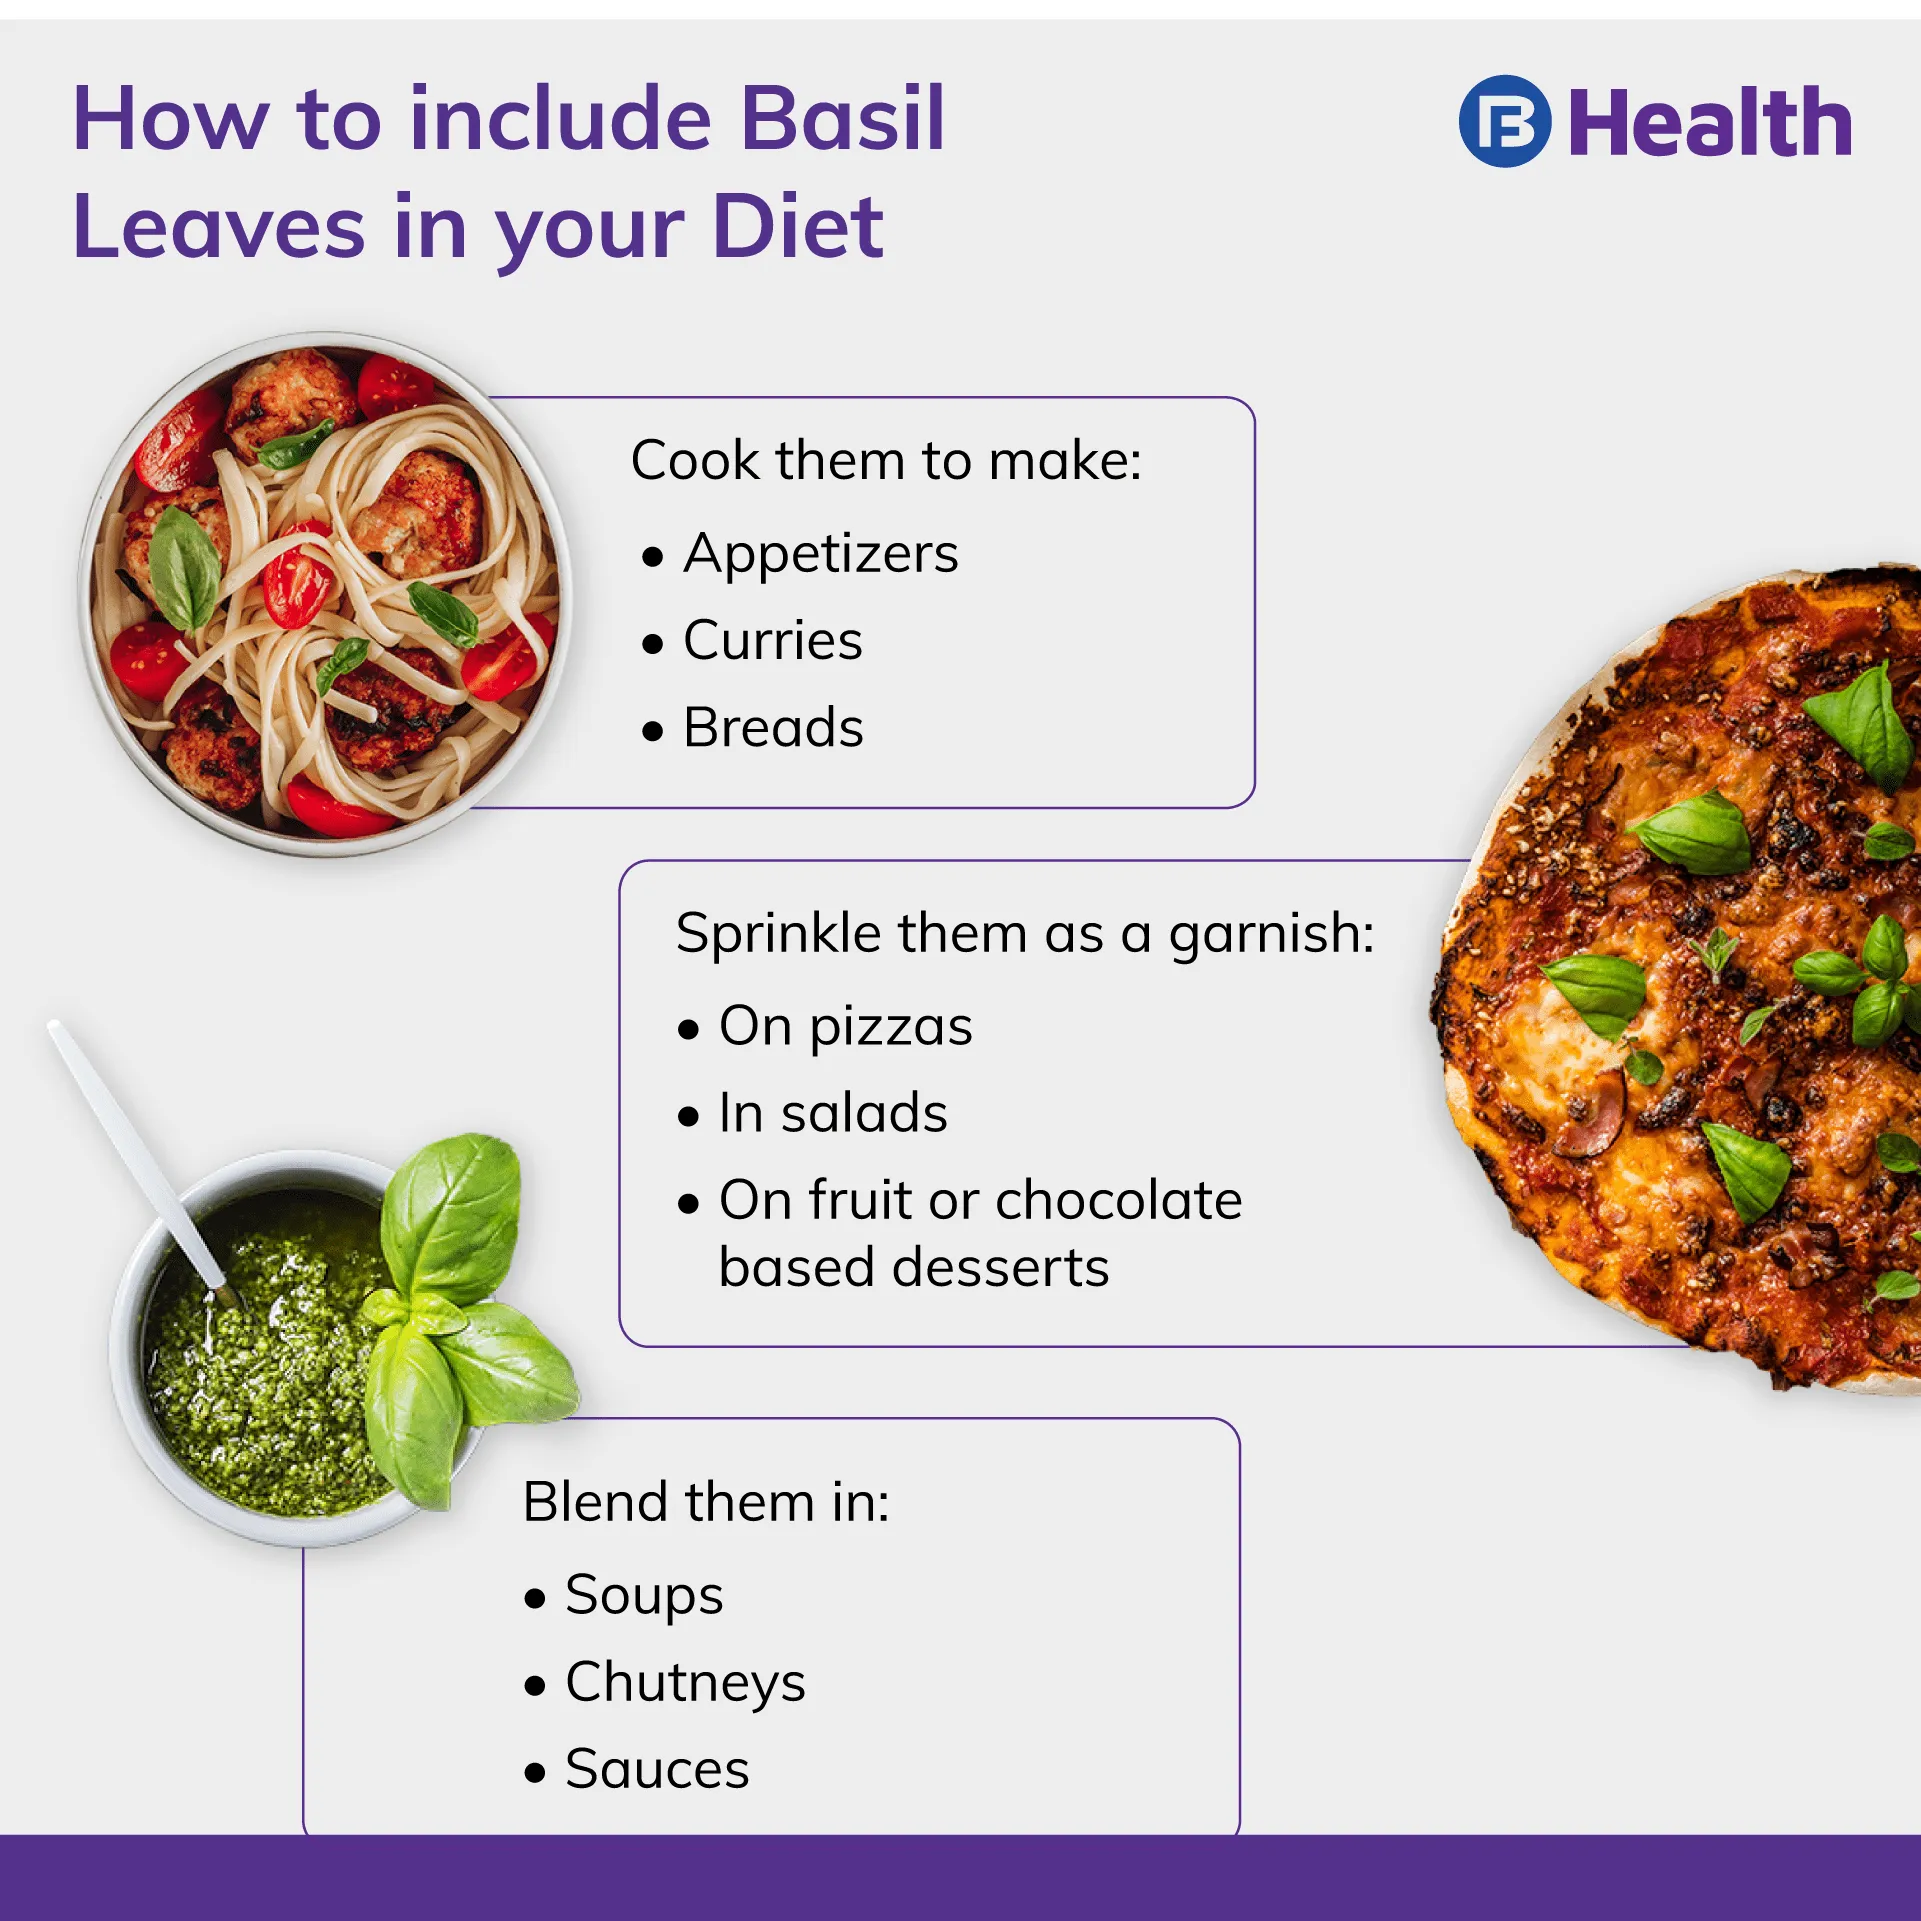 Basil Leaves Add in Diet infographic